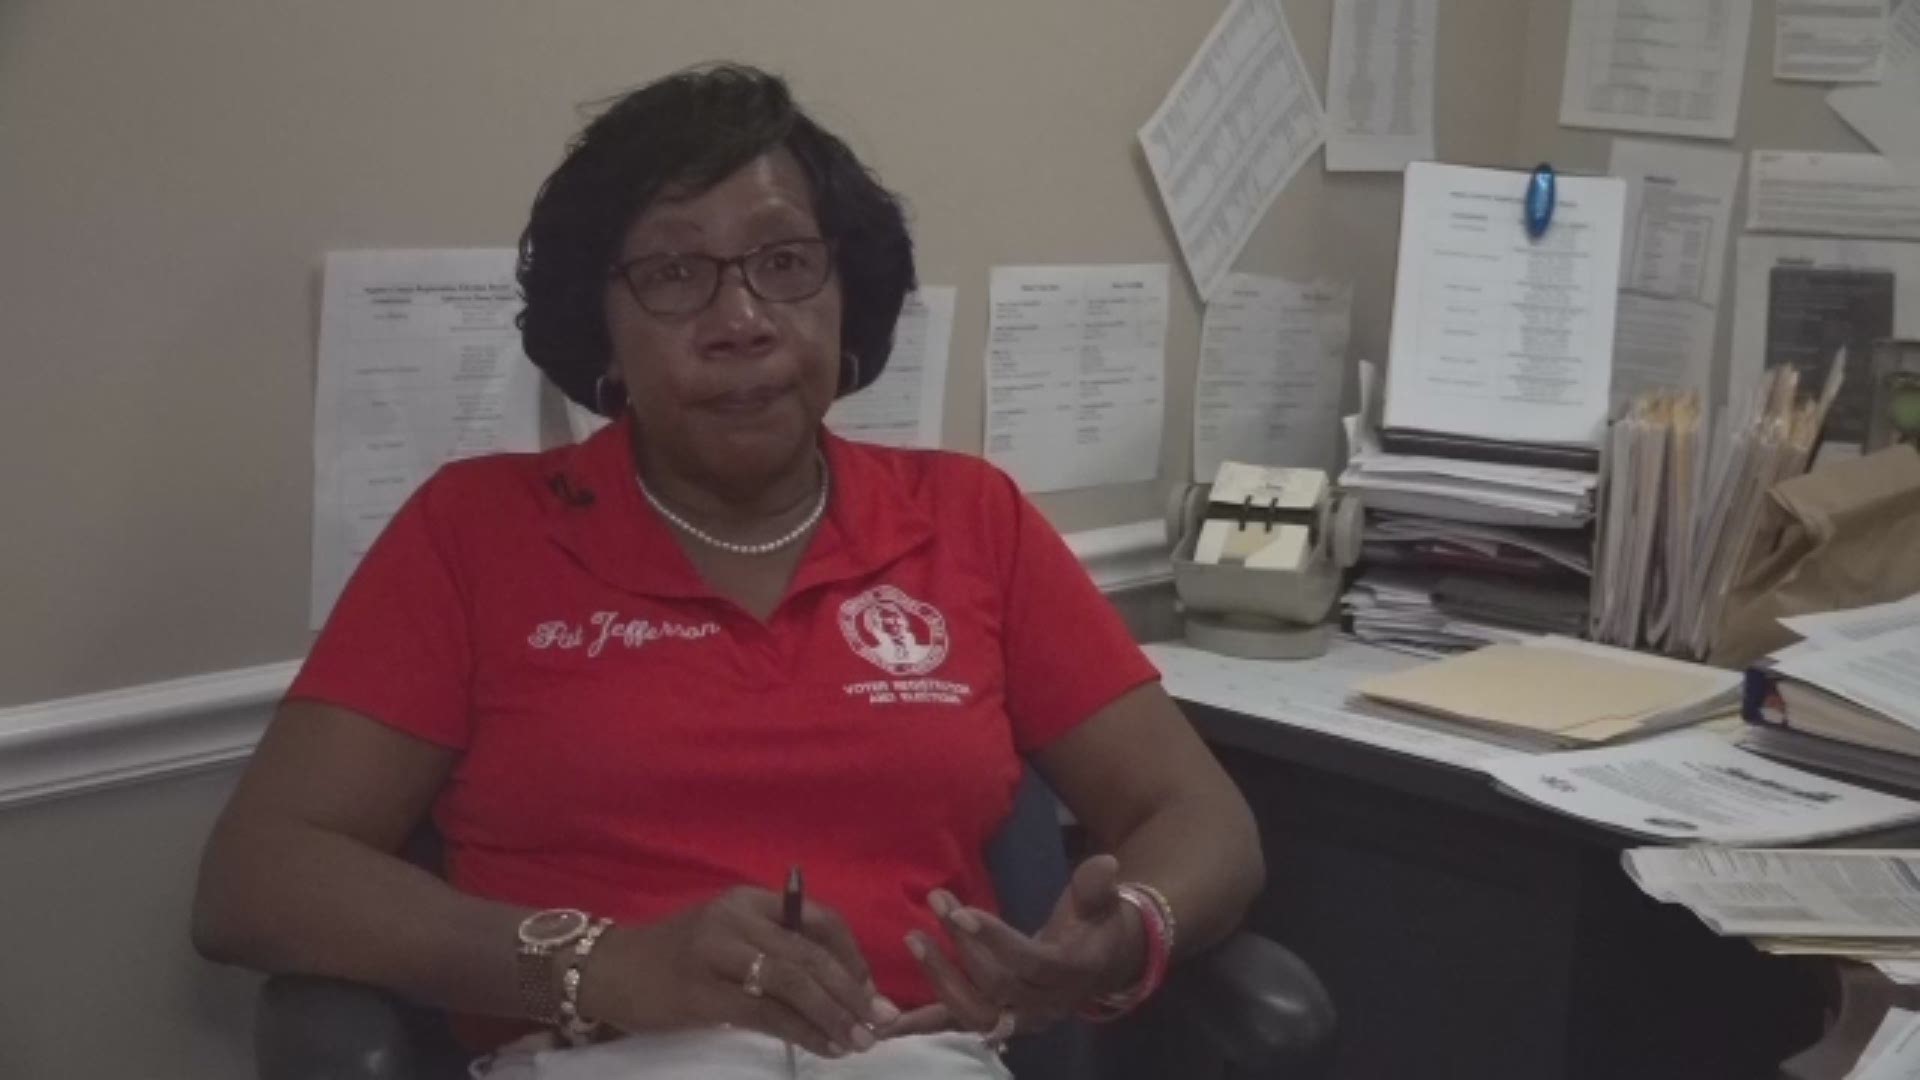 Sumter County Voter Registration and Elections Director Patricia Jefferson shares a few specifics of the filing process.